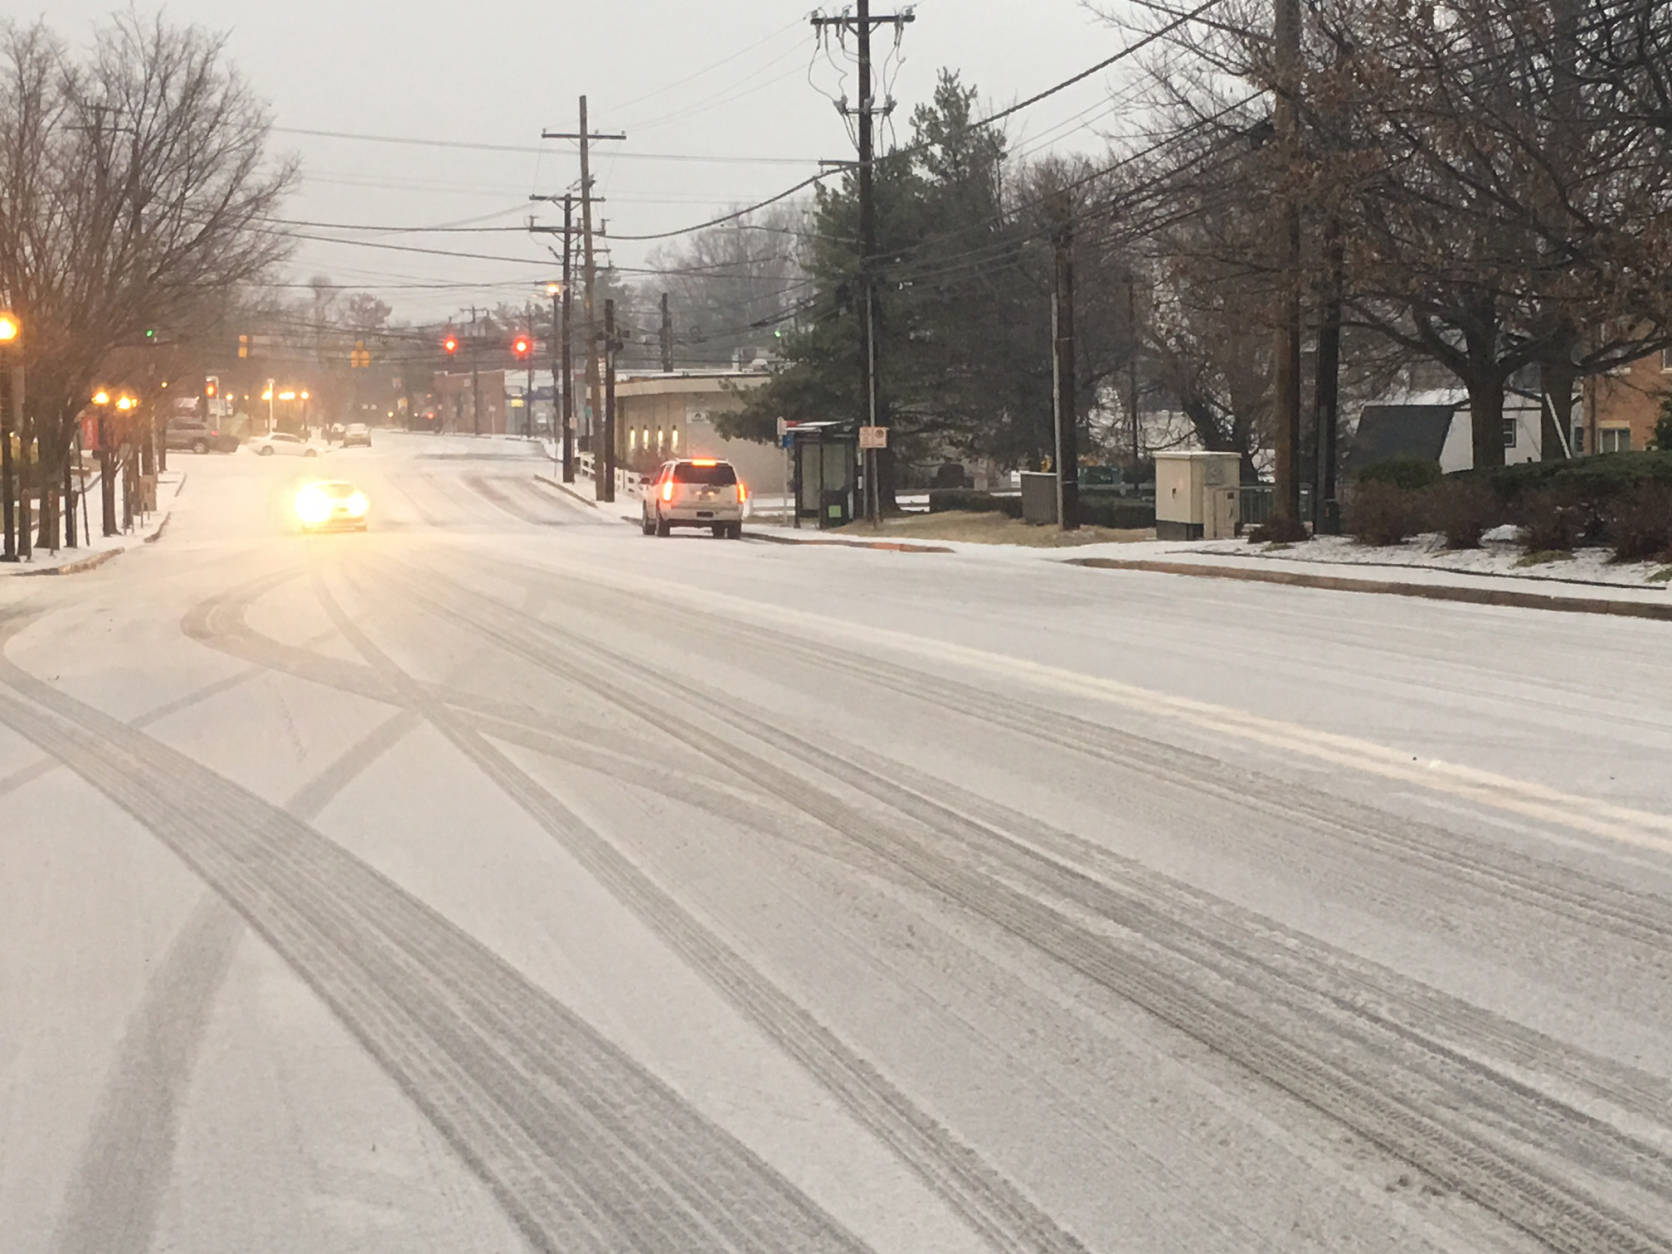 Ice covered the roads in much of the D.C. region early Saturday morning during a Winter Weather Advisory. (WTOP/Ian Crawford)